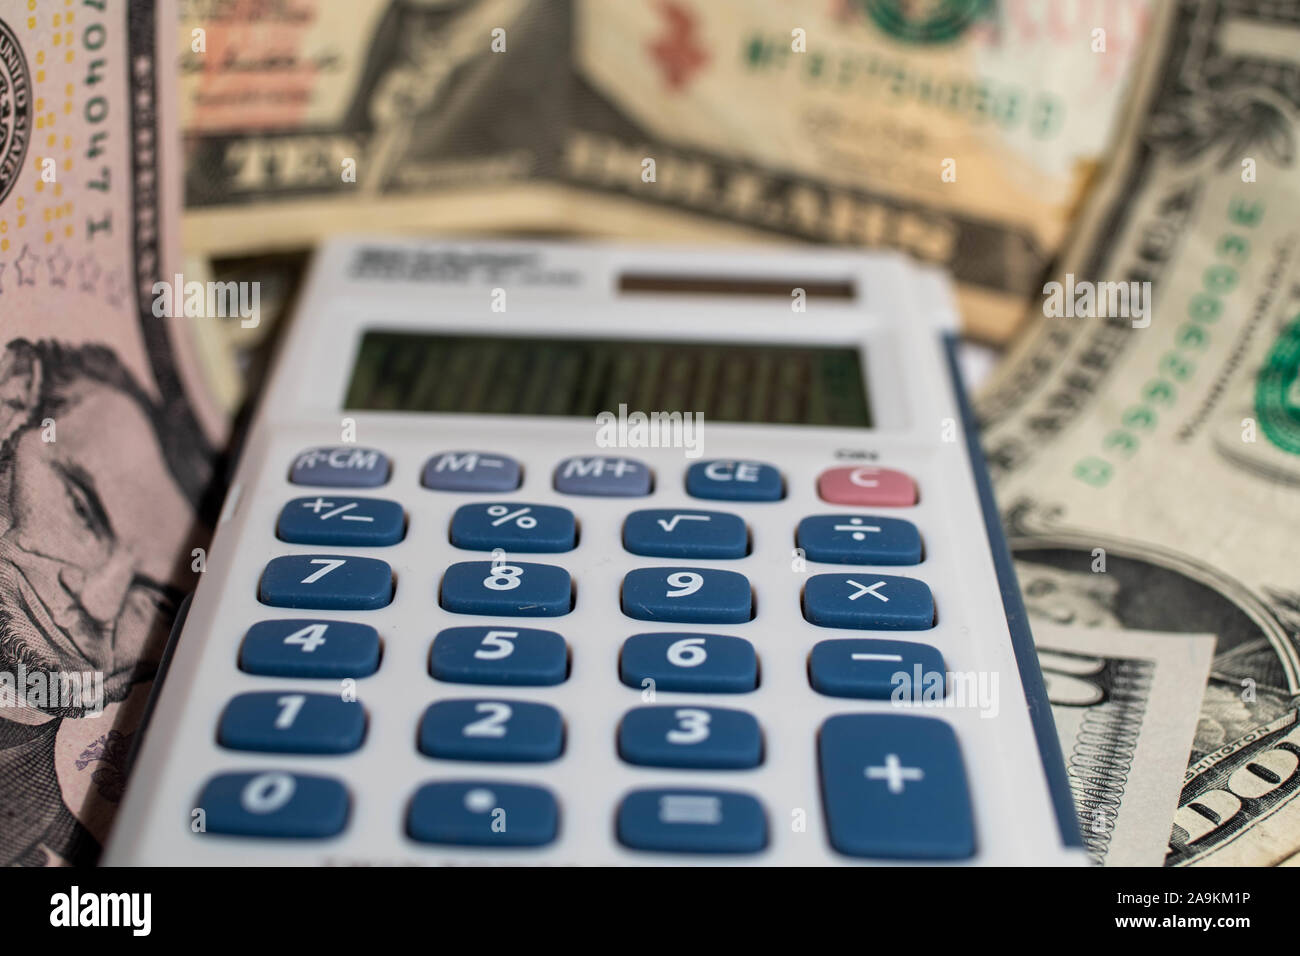 Calculator with money in the background Stock Photo